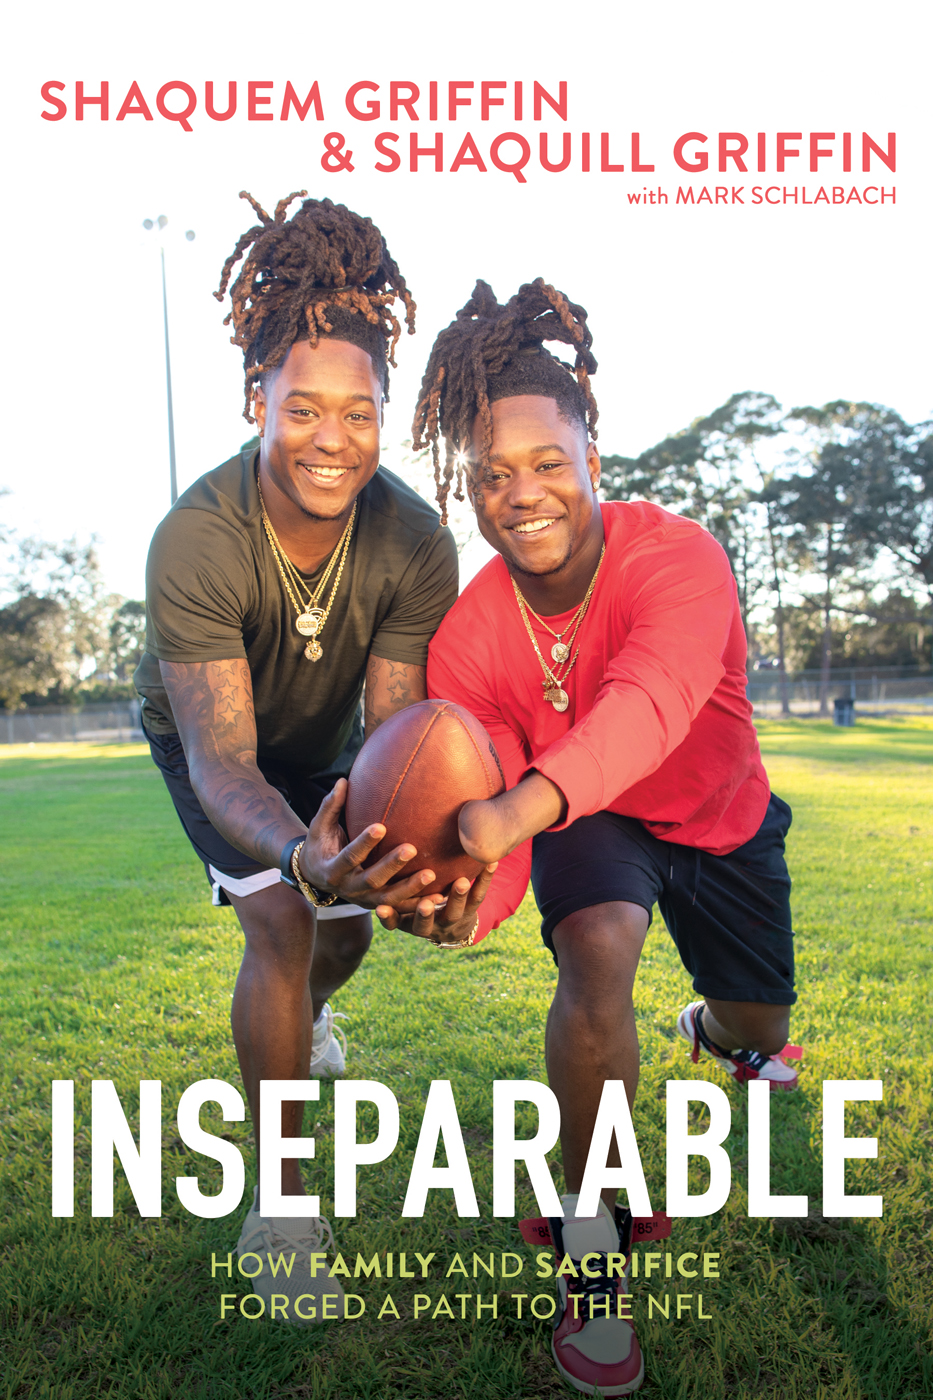 Inseparable by Shaquem Griffin and Shaquill Griffin